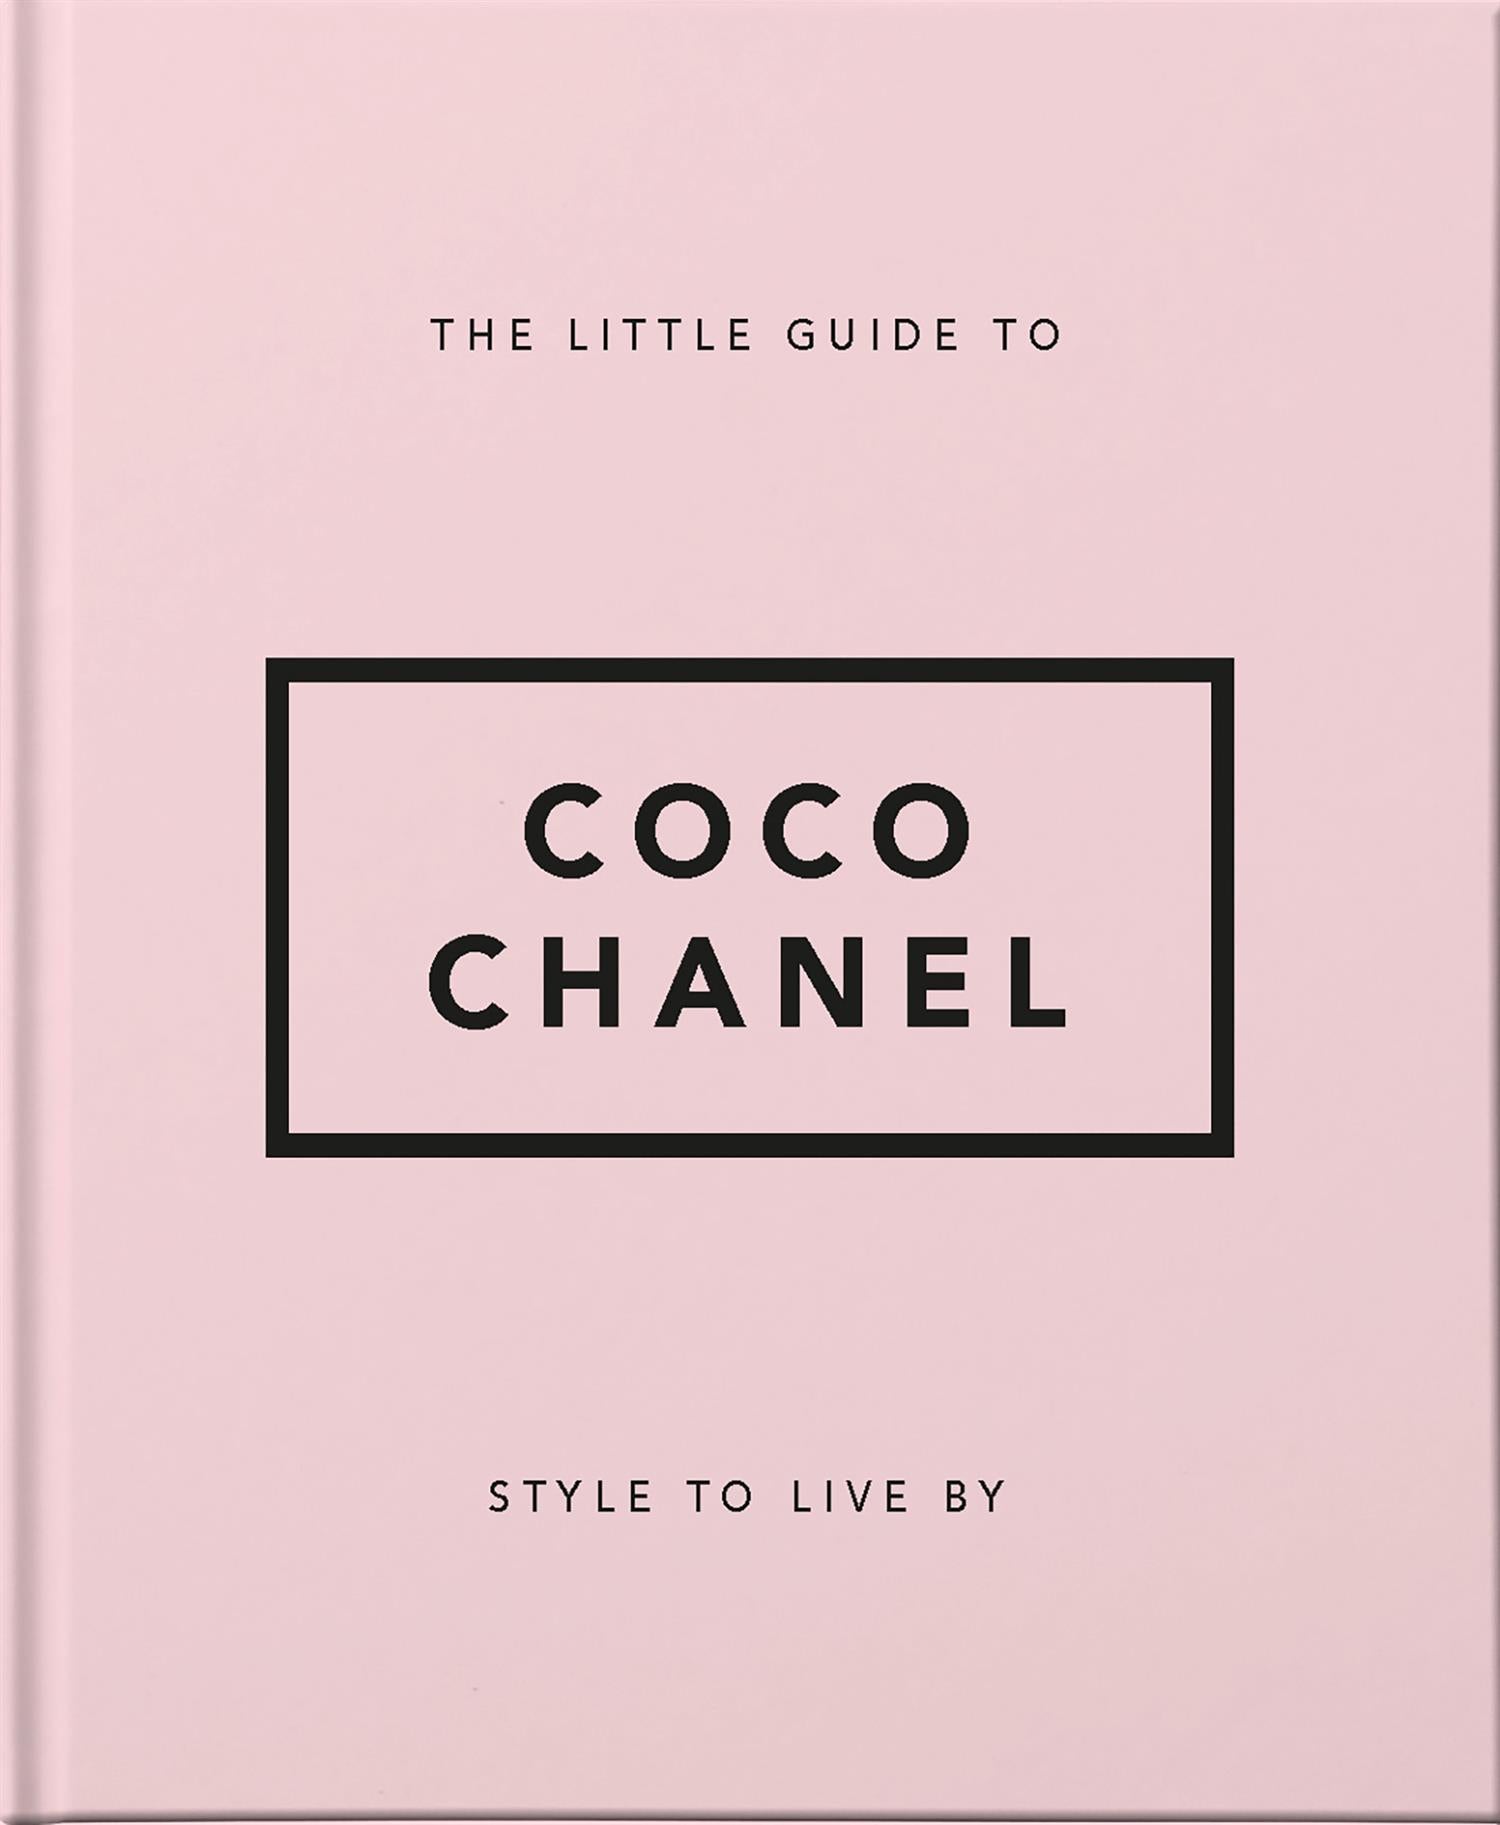 NEW MAGS The little guide to Coco Chanel